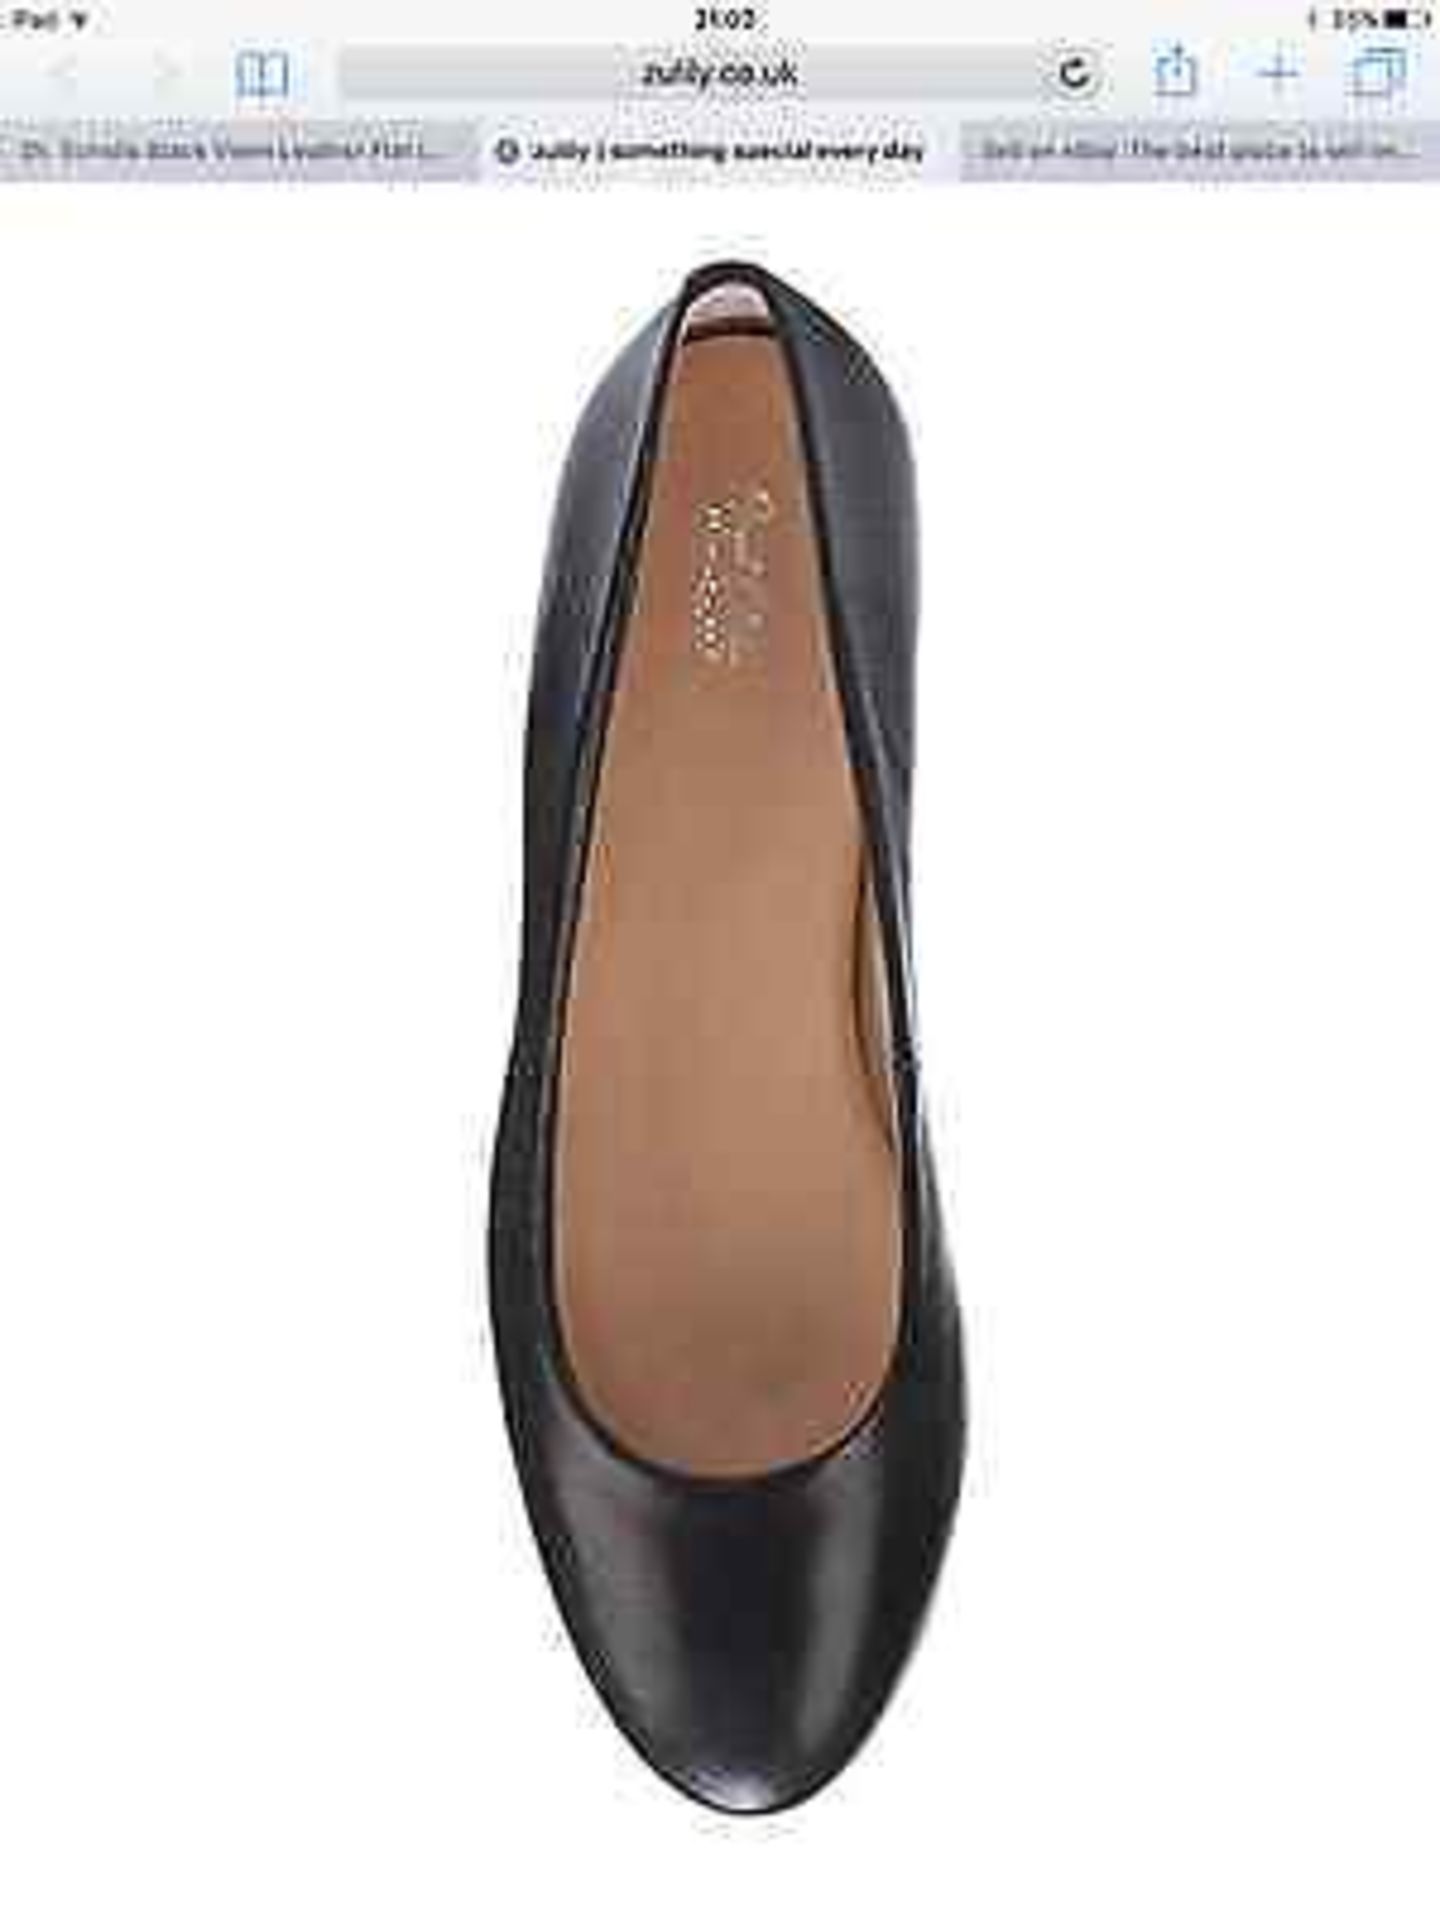 Dr Scholl's Black Vixen Leather Flat, Size 6 (New with box) - Image 4 of 8